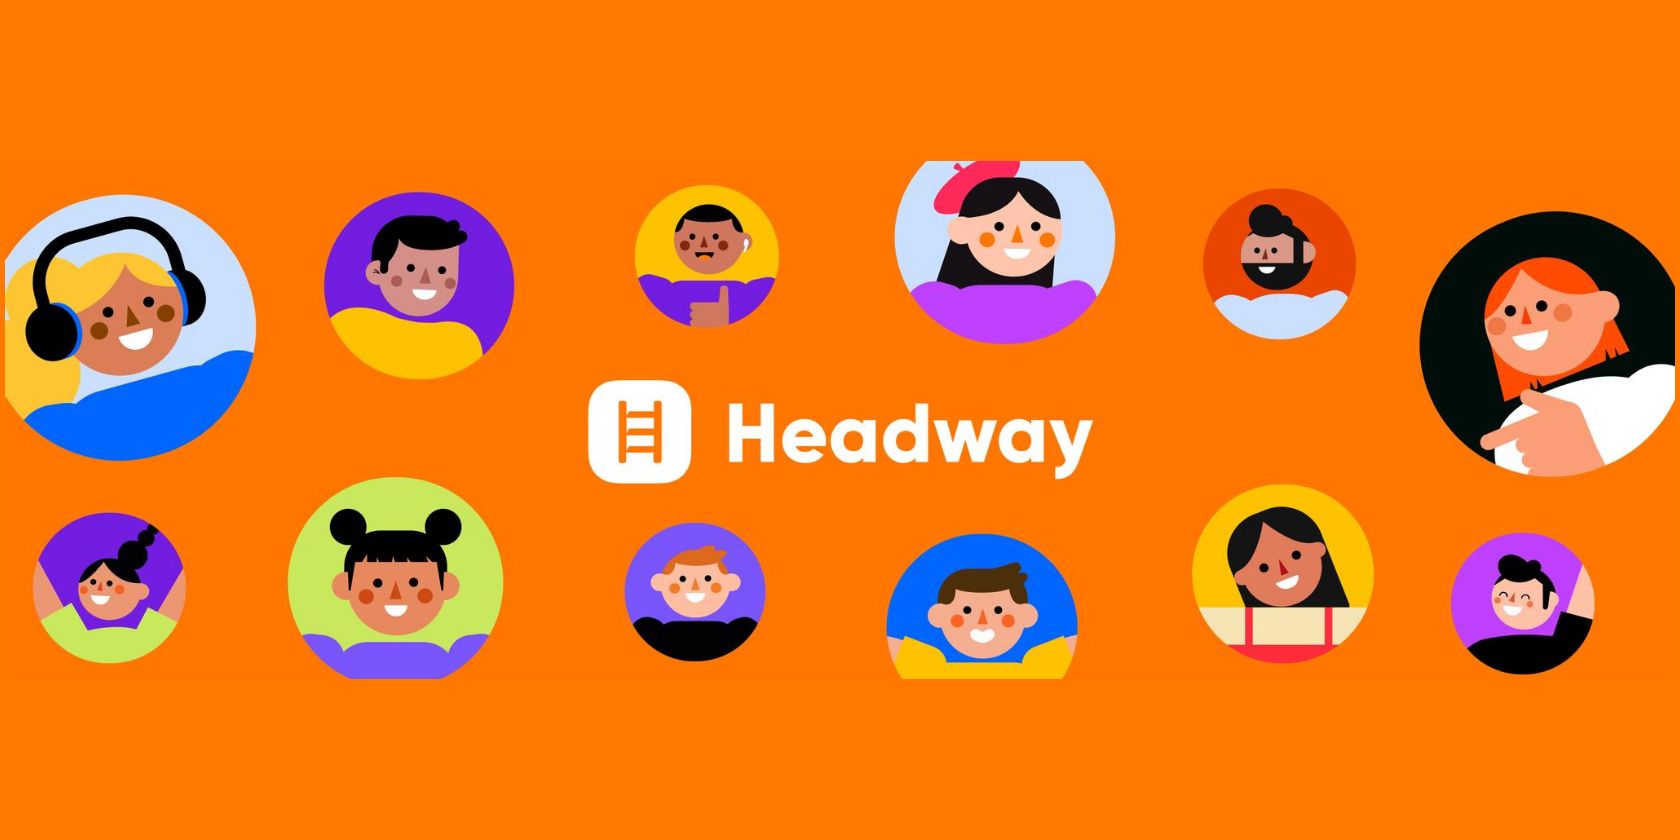 7 Features of the Headway App to Help You Grow Through Self-Learning